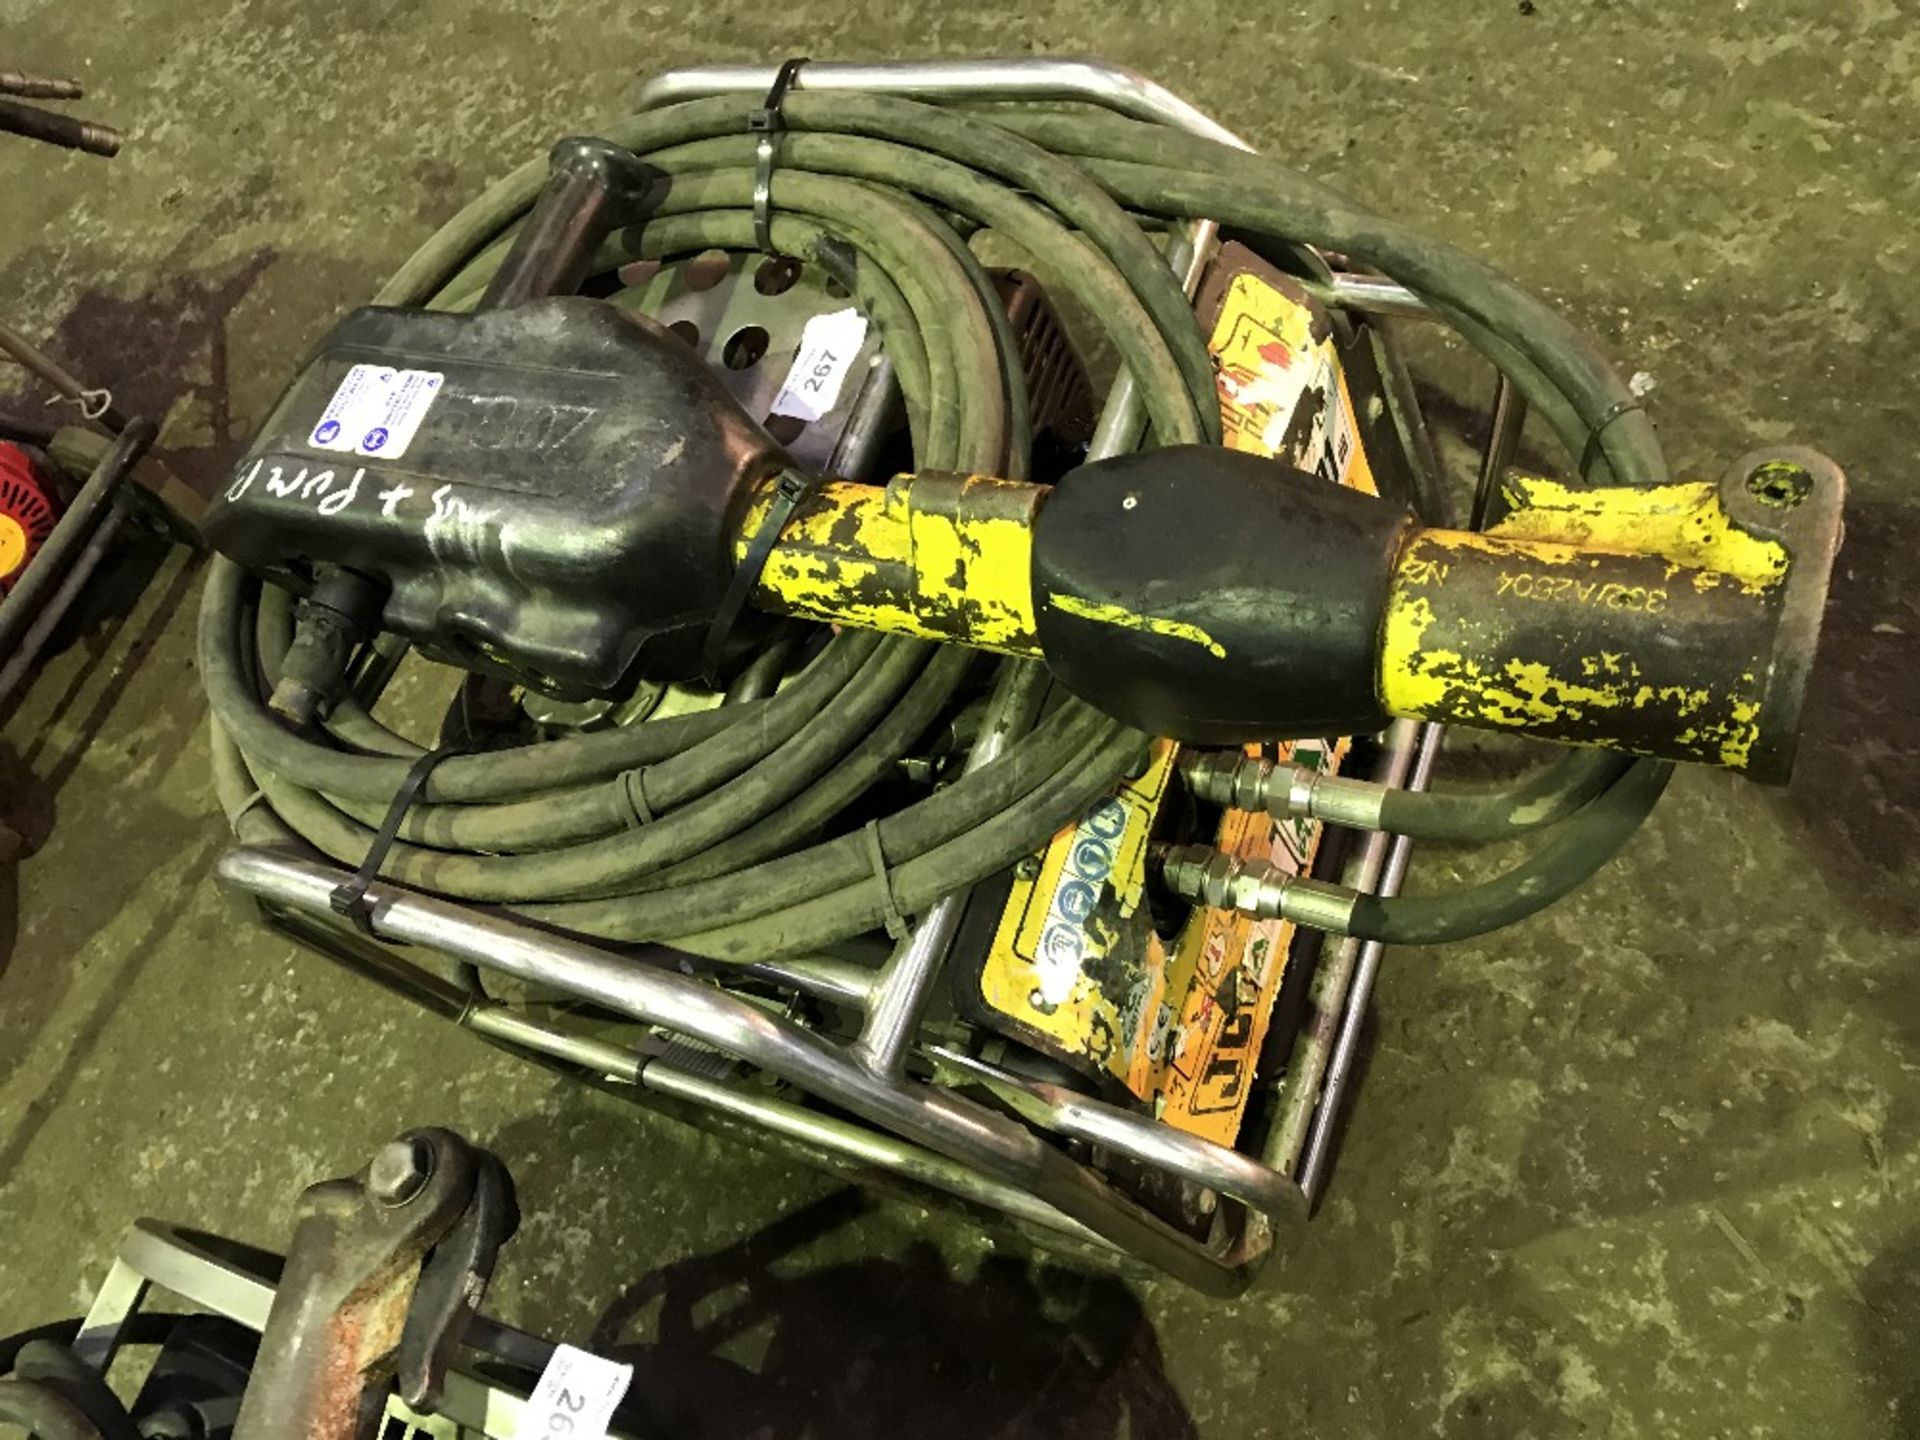 JCB Beaver pack c/w hose and gun WHEN TESTED WAS SEEN TO RUN AND PUMP. PRESSURE AND GUN UNCHECKED - Bild 2 aus 2